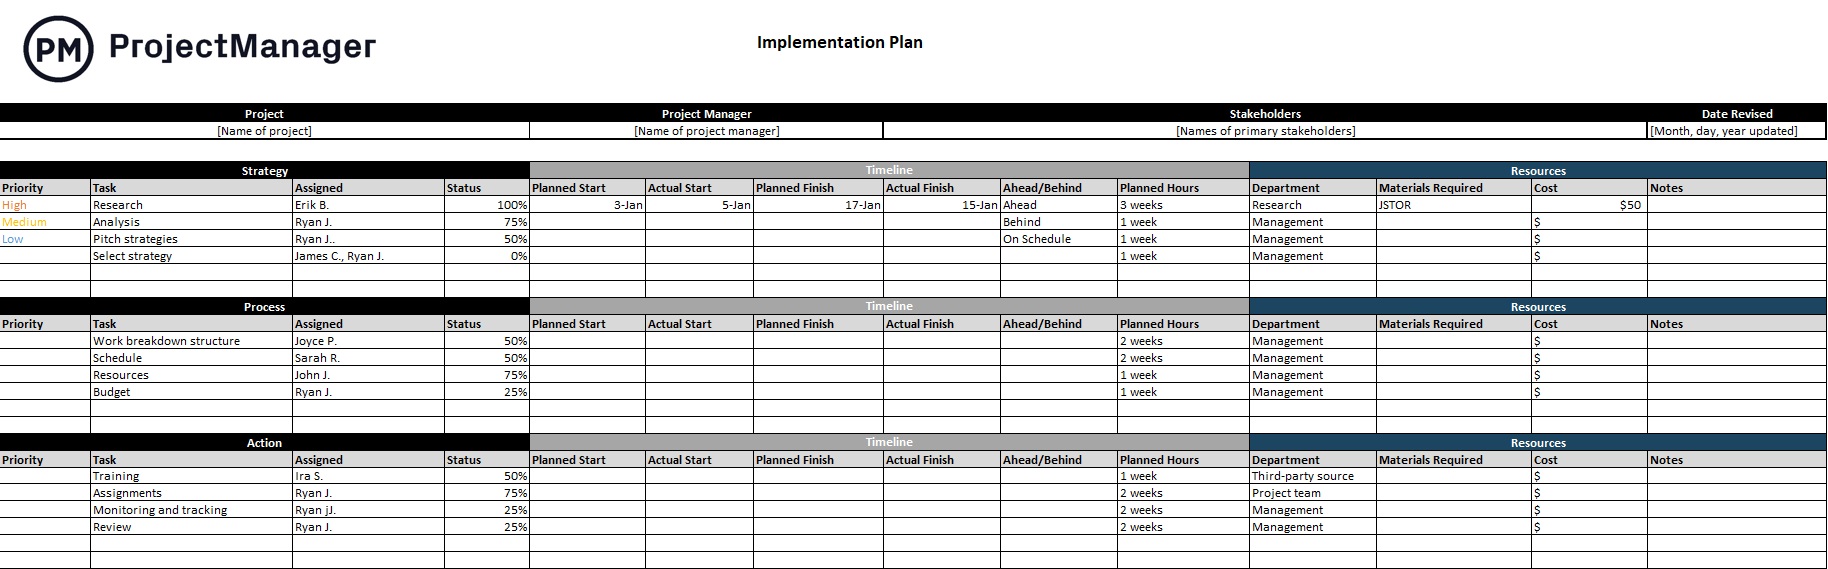 ProjectManager's free implementation plan template